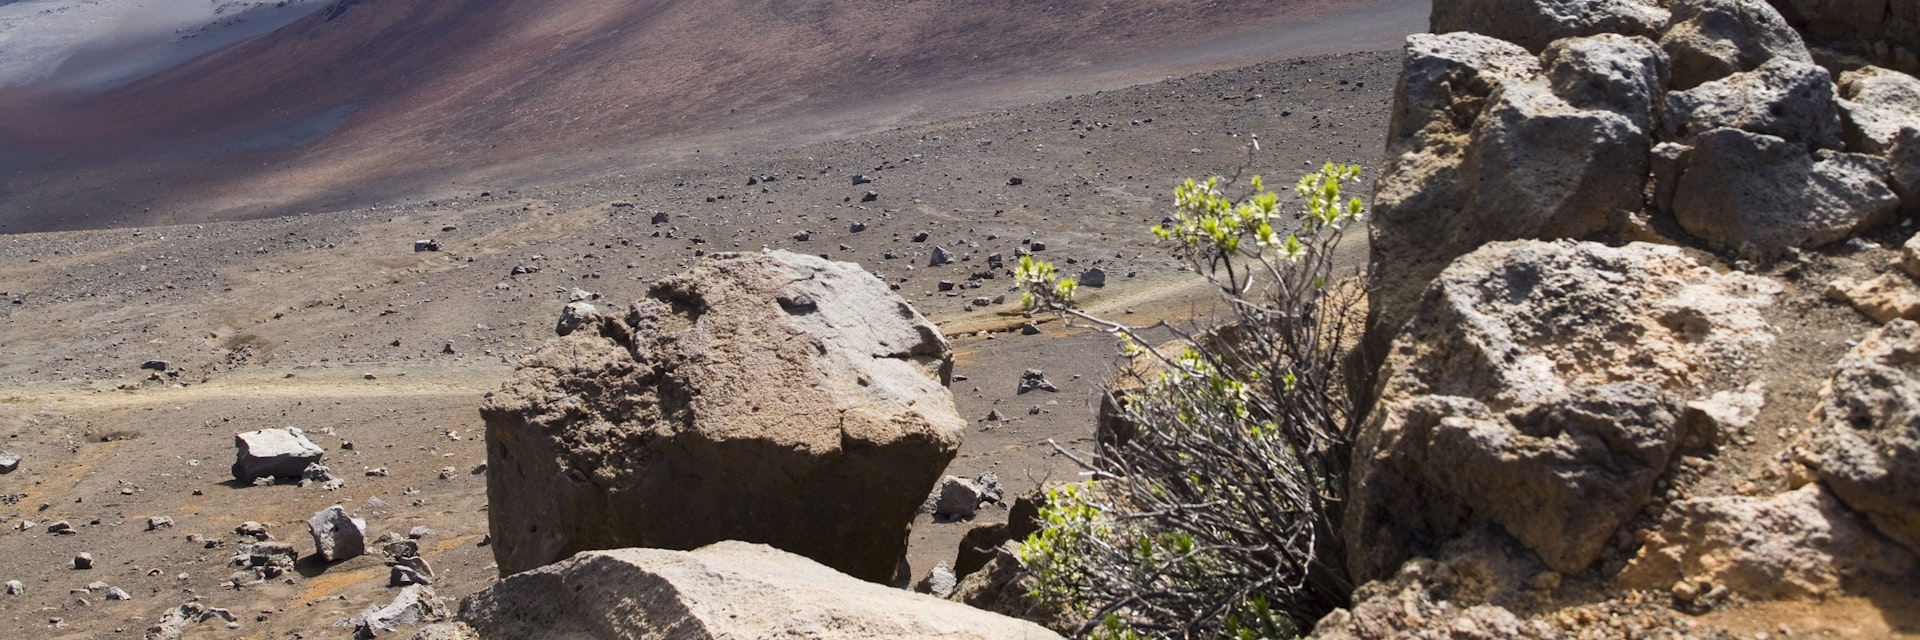 View of the crater from the Sliding Sands Trail, Haleakala National Park.